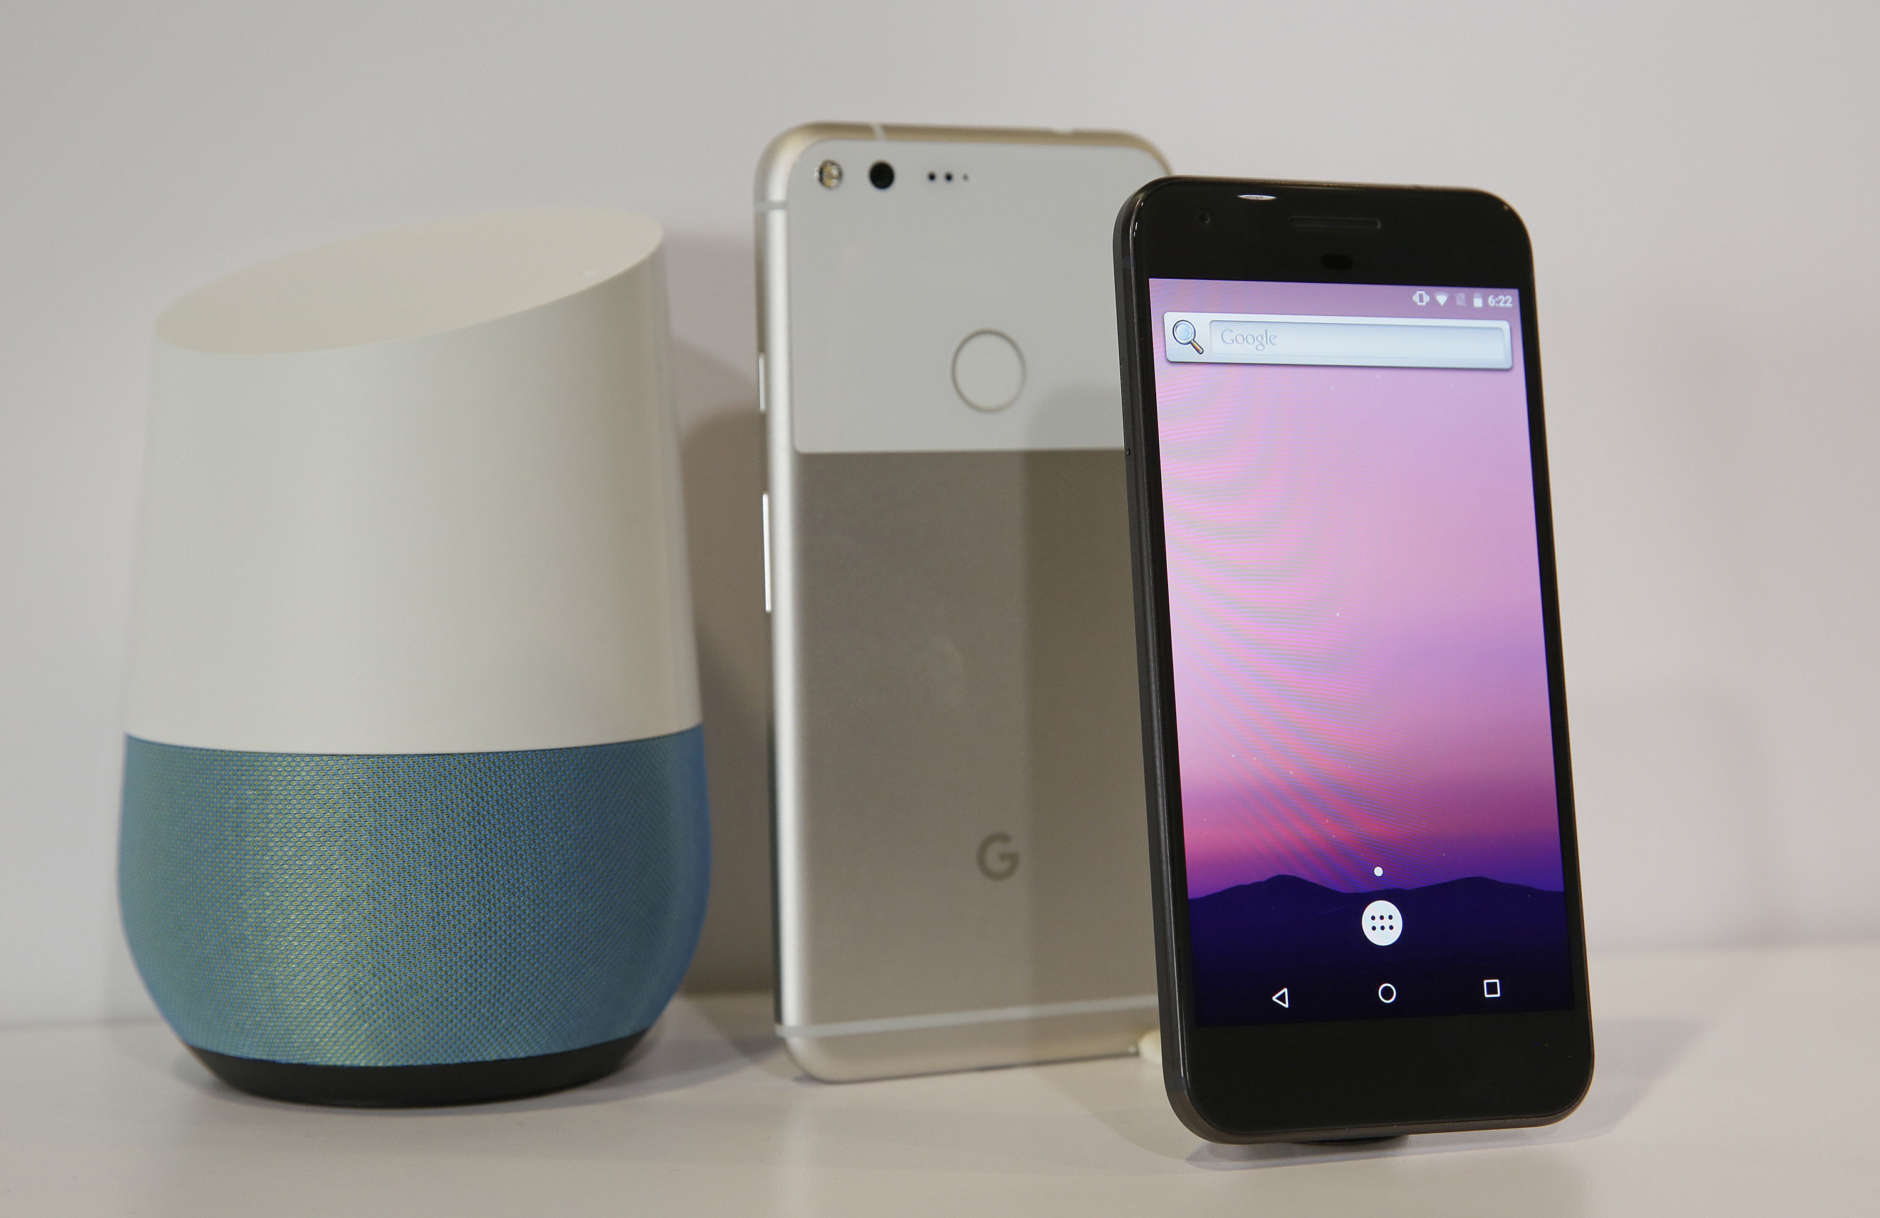 FILE - In this Oct. 4, 2016 file photo, the new Google Pixel phone is displayed next to a Google Home smart speaker, left, following a product event in San Francisco. Google’s new smart speaker is at once a secretary, a librarian and a radio. If all this sounds familiar, it’s because Amazon has been at it for about two years. Its Echo speaker can do what Home does and more, thanks to Amazon’s head start in partnering with third-party services such as Domino’s Pizza and Fitbit. But Home is smarter in a few other ways, as it taps what it knows about you from Gmail, Maps and other Google services.  (AP Photo/Eric Risberg)